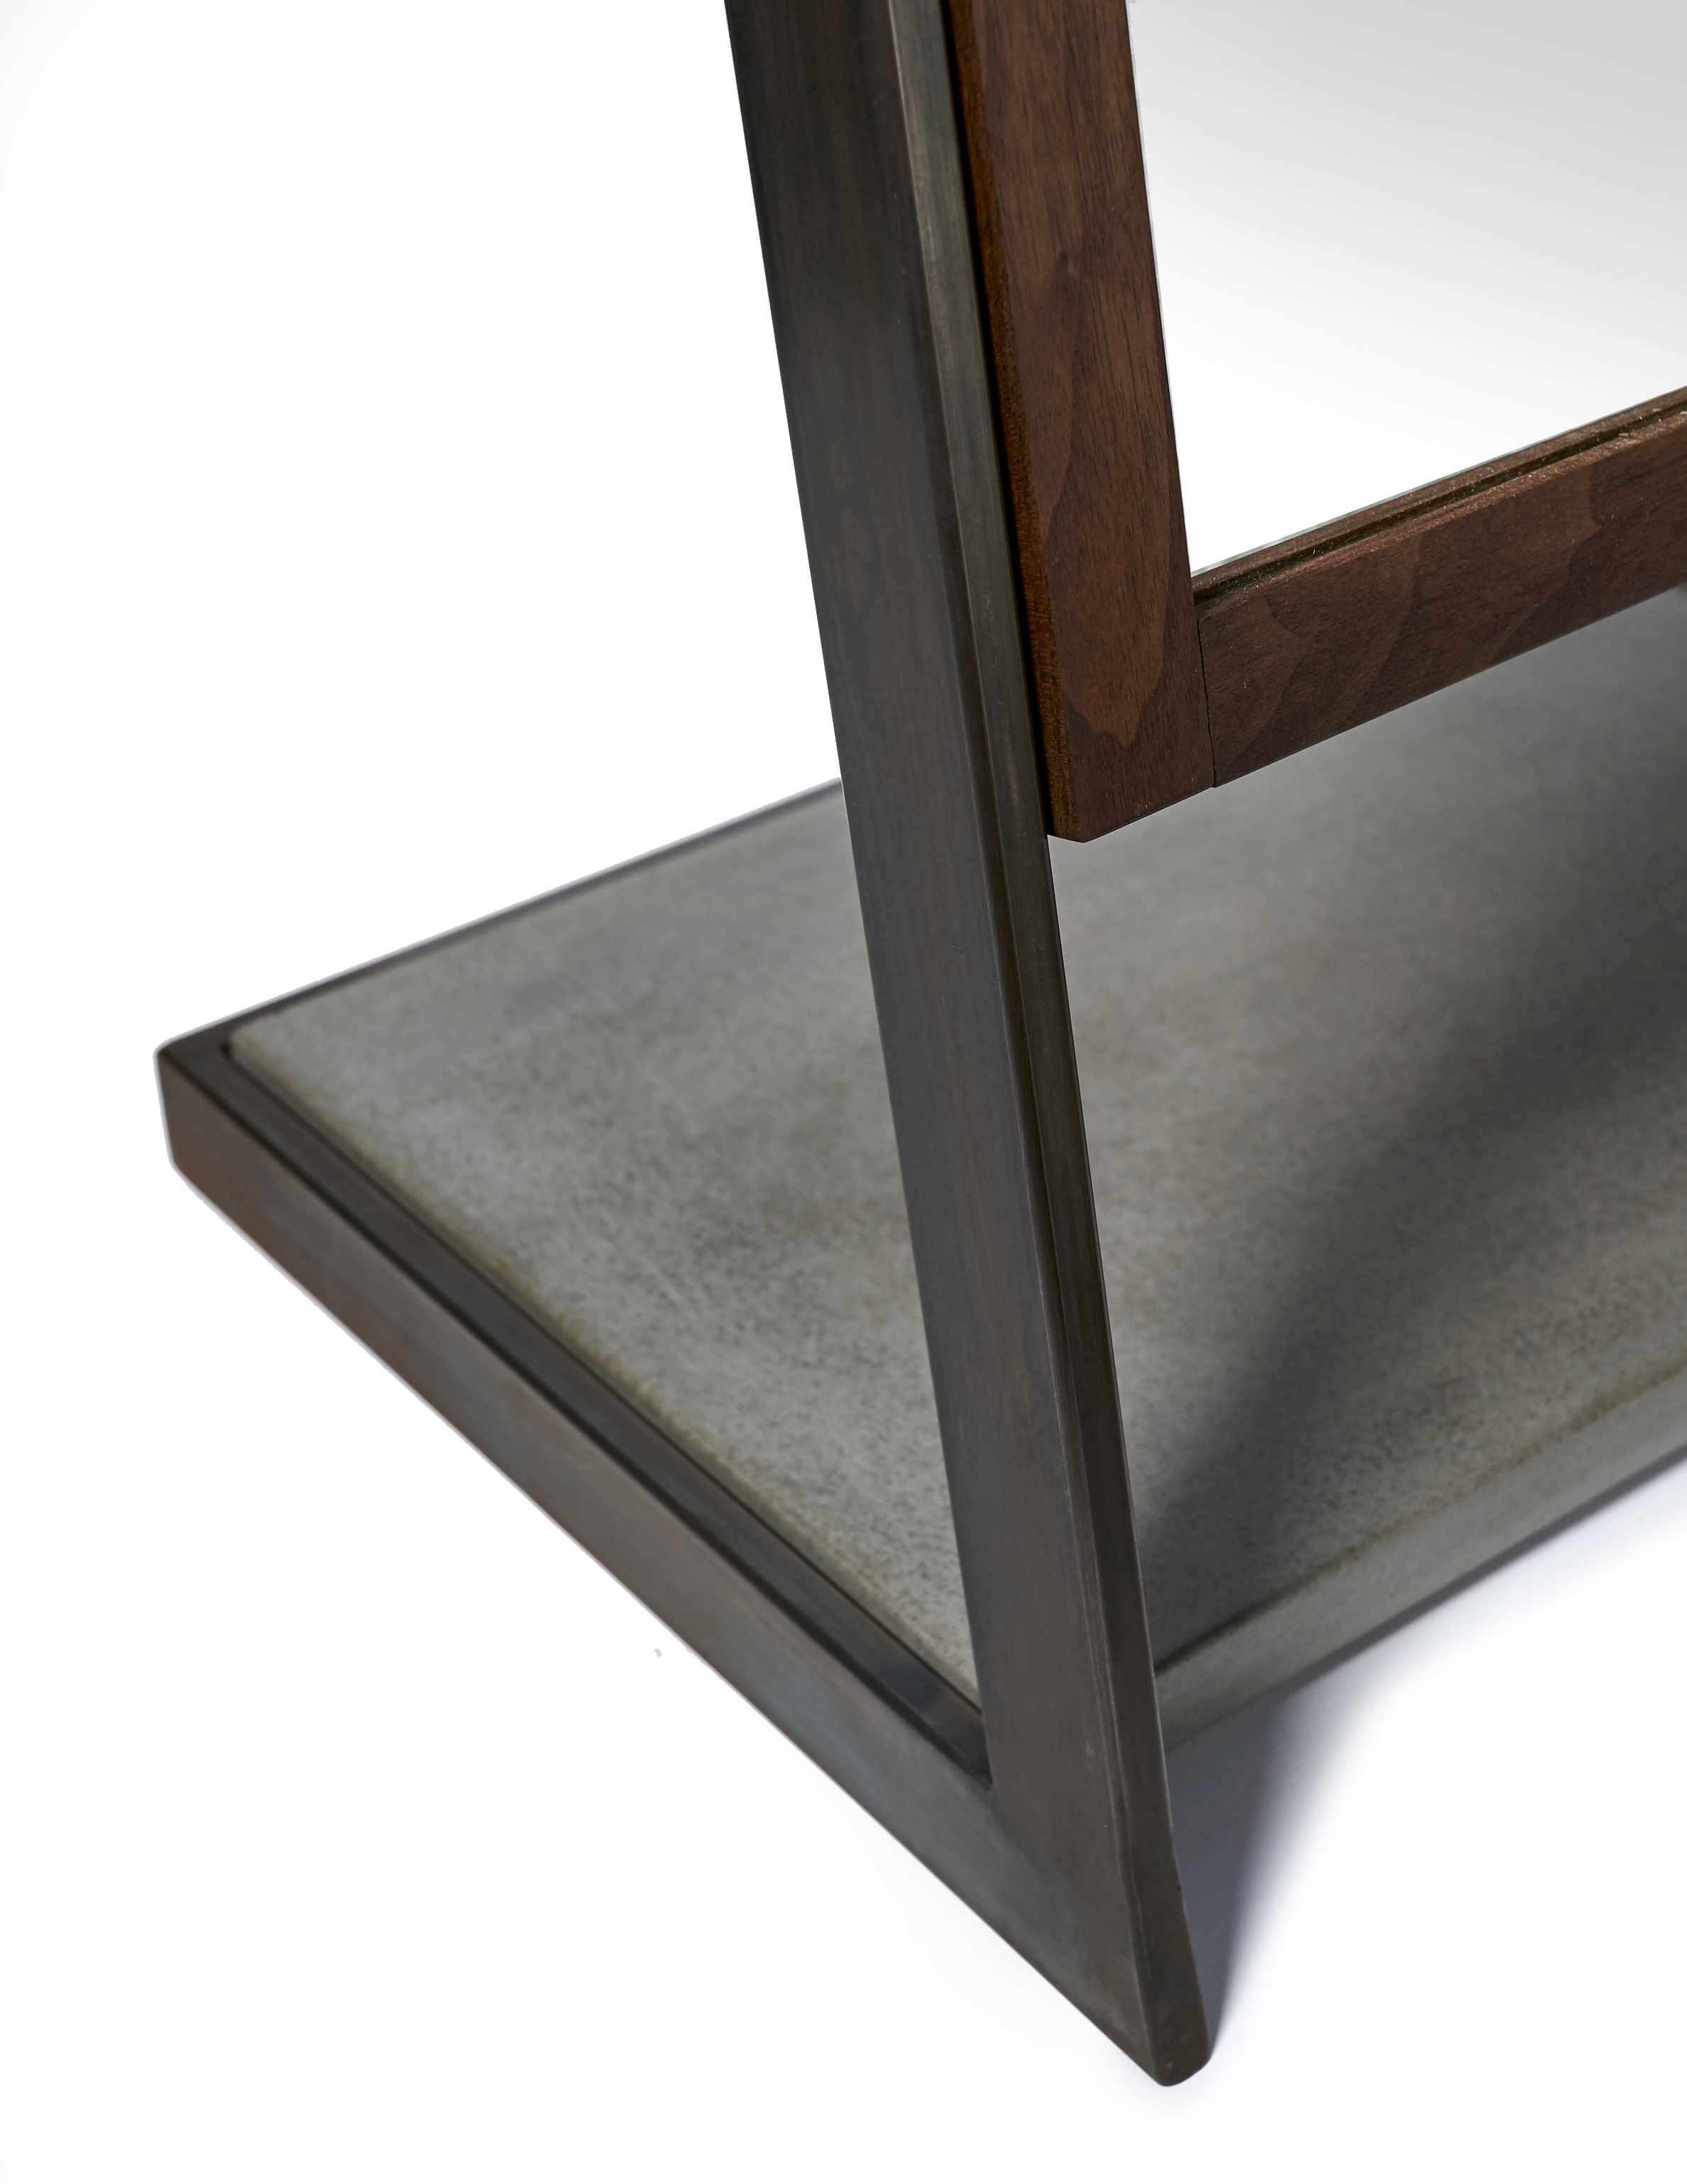  Charcoal Concrete Inlay   Download Tear Sheet  